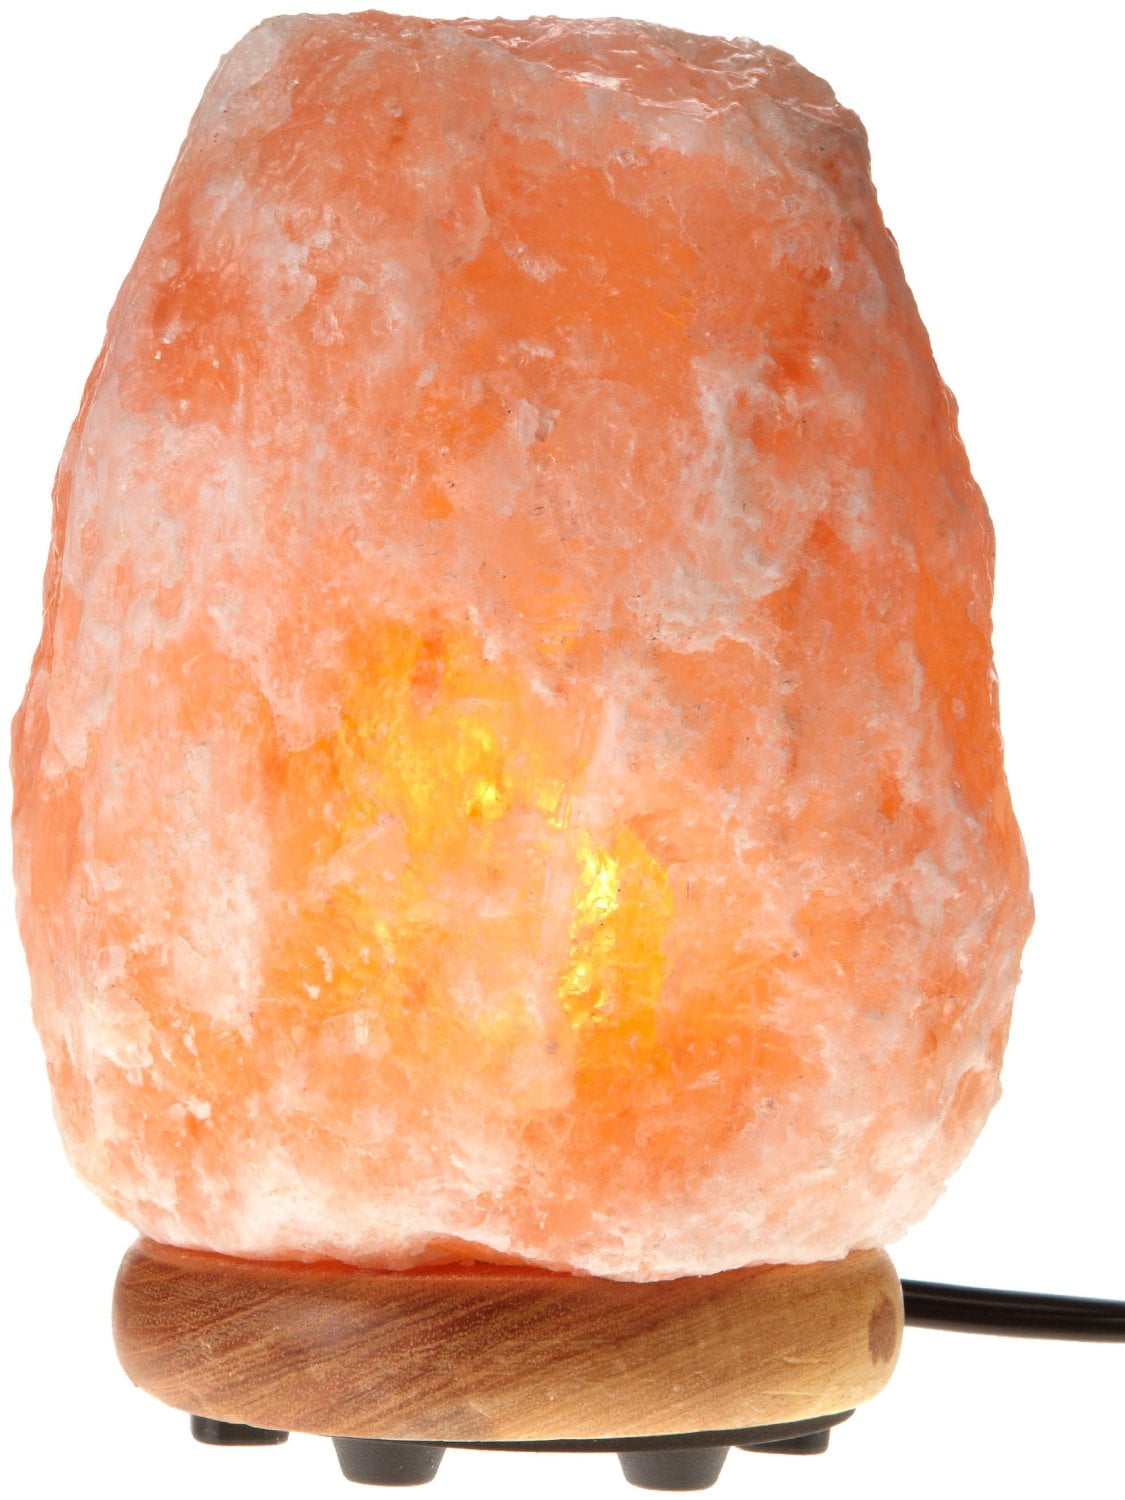 Himalayan Salt Lamp 100% Natural & Hand Crafted with Wooden Base Premium Quality Crystal Rock Lamp C 7-10 Kg